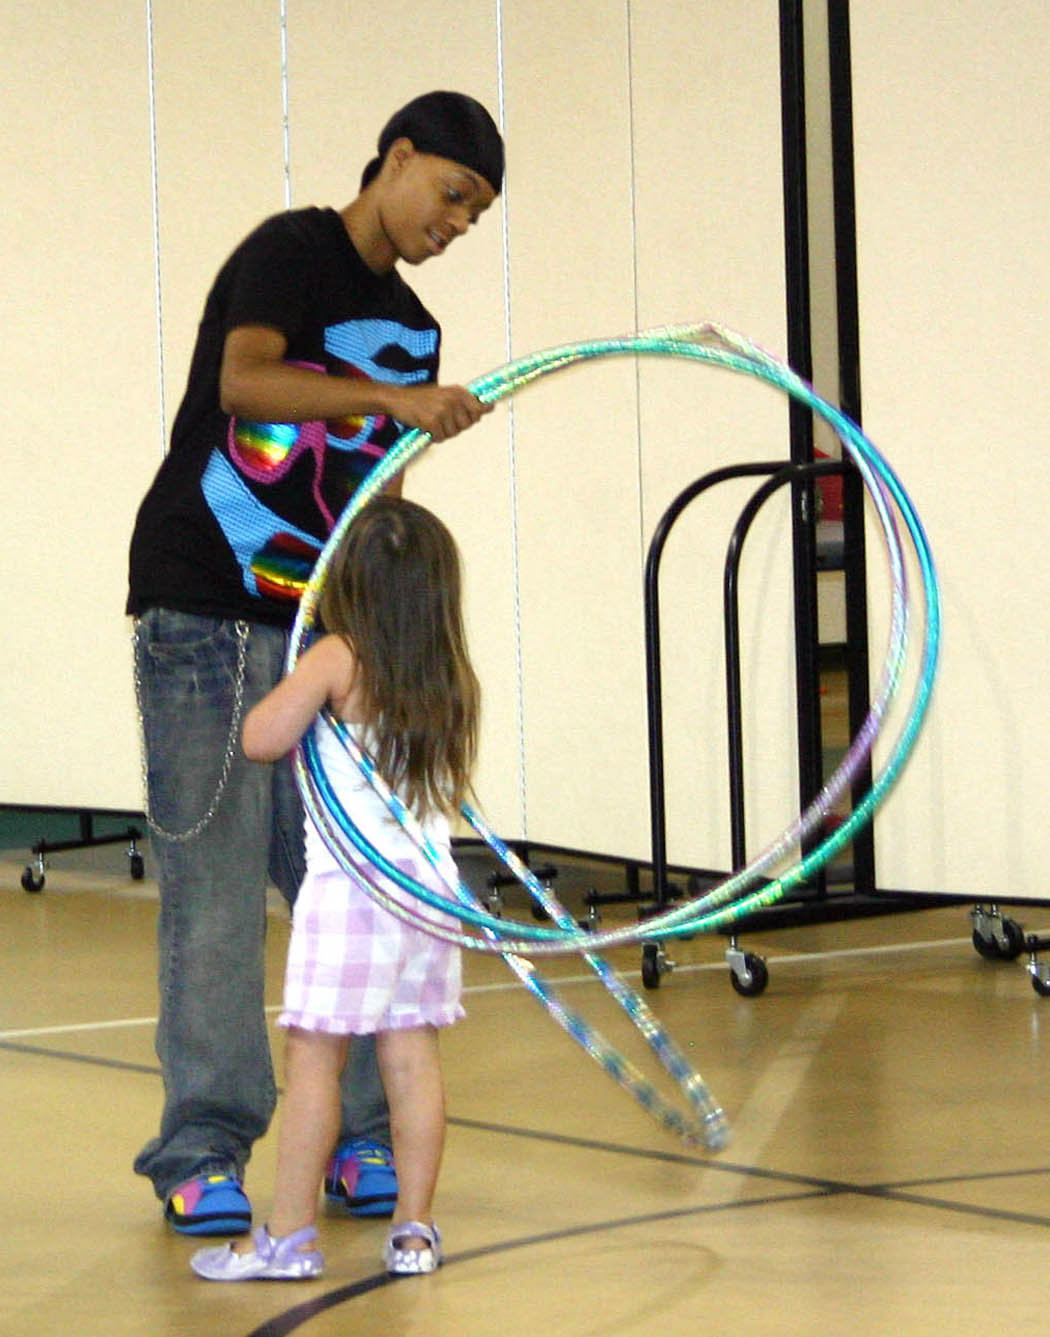 Click to enlarge,  Faye McLean (left), of Sanford, assists Angelica Leake in playing with hoops during the Stevens Center&#8217;s Party, Paint and Playtime summer camp, held during June and July. McLean is enrolled in Central Carolina Community College&#8217;s early childhood education program. Her &#8216;Child, Family, and Community&#8217; class collaborated with nursing students from UNC-Chapel Hill to staff and plan activities for the Center&#8217;s summer camp for 2-to-4-year-olds and the Kids Can Connect camp for 5-to-8-year-olds. Both camps included children with and without disabilities. The nursing students gained experience working in the community and the CCCC students applied what they had learned in class about working with young children with and without disabilities, individually and in groups.  